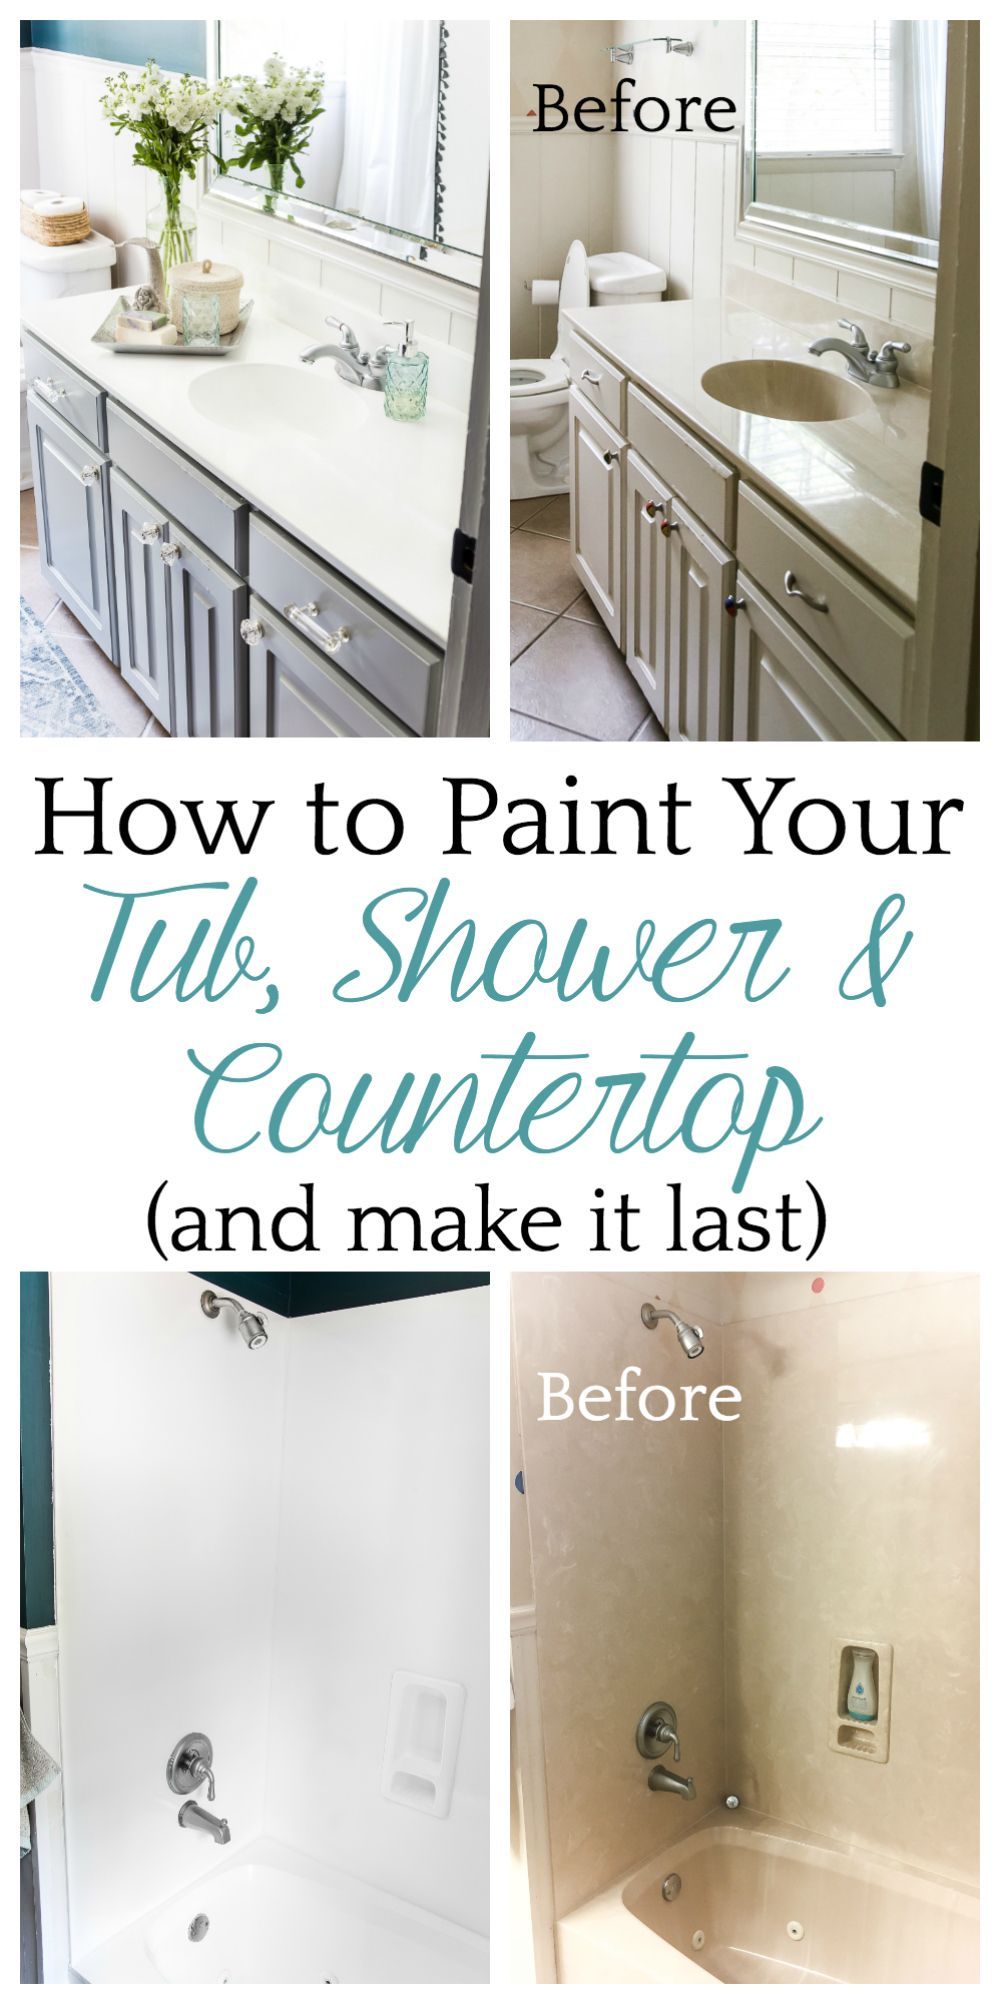 Our Painted Sink Countertop Tub & Shower 8 Months Later - Bless'er House - Our Painted Sink Countertop Tub & Shower 8 Months Later - Bless'er House -   18 diy House painting ideas